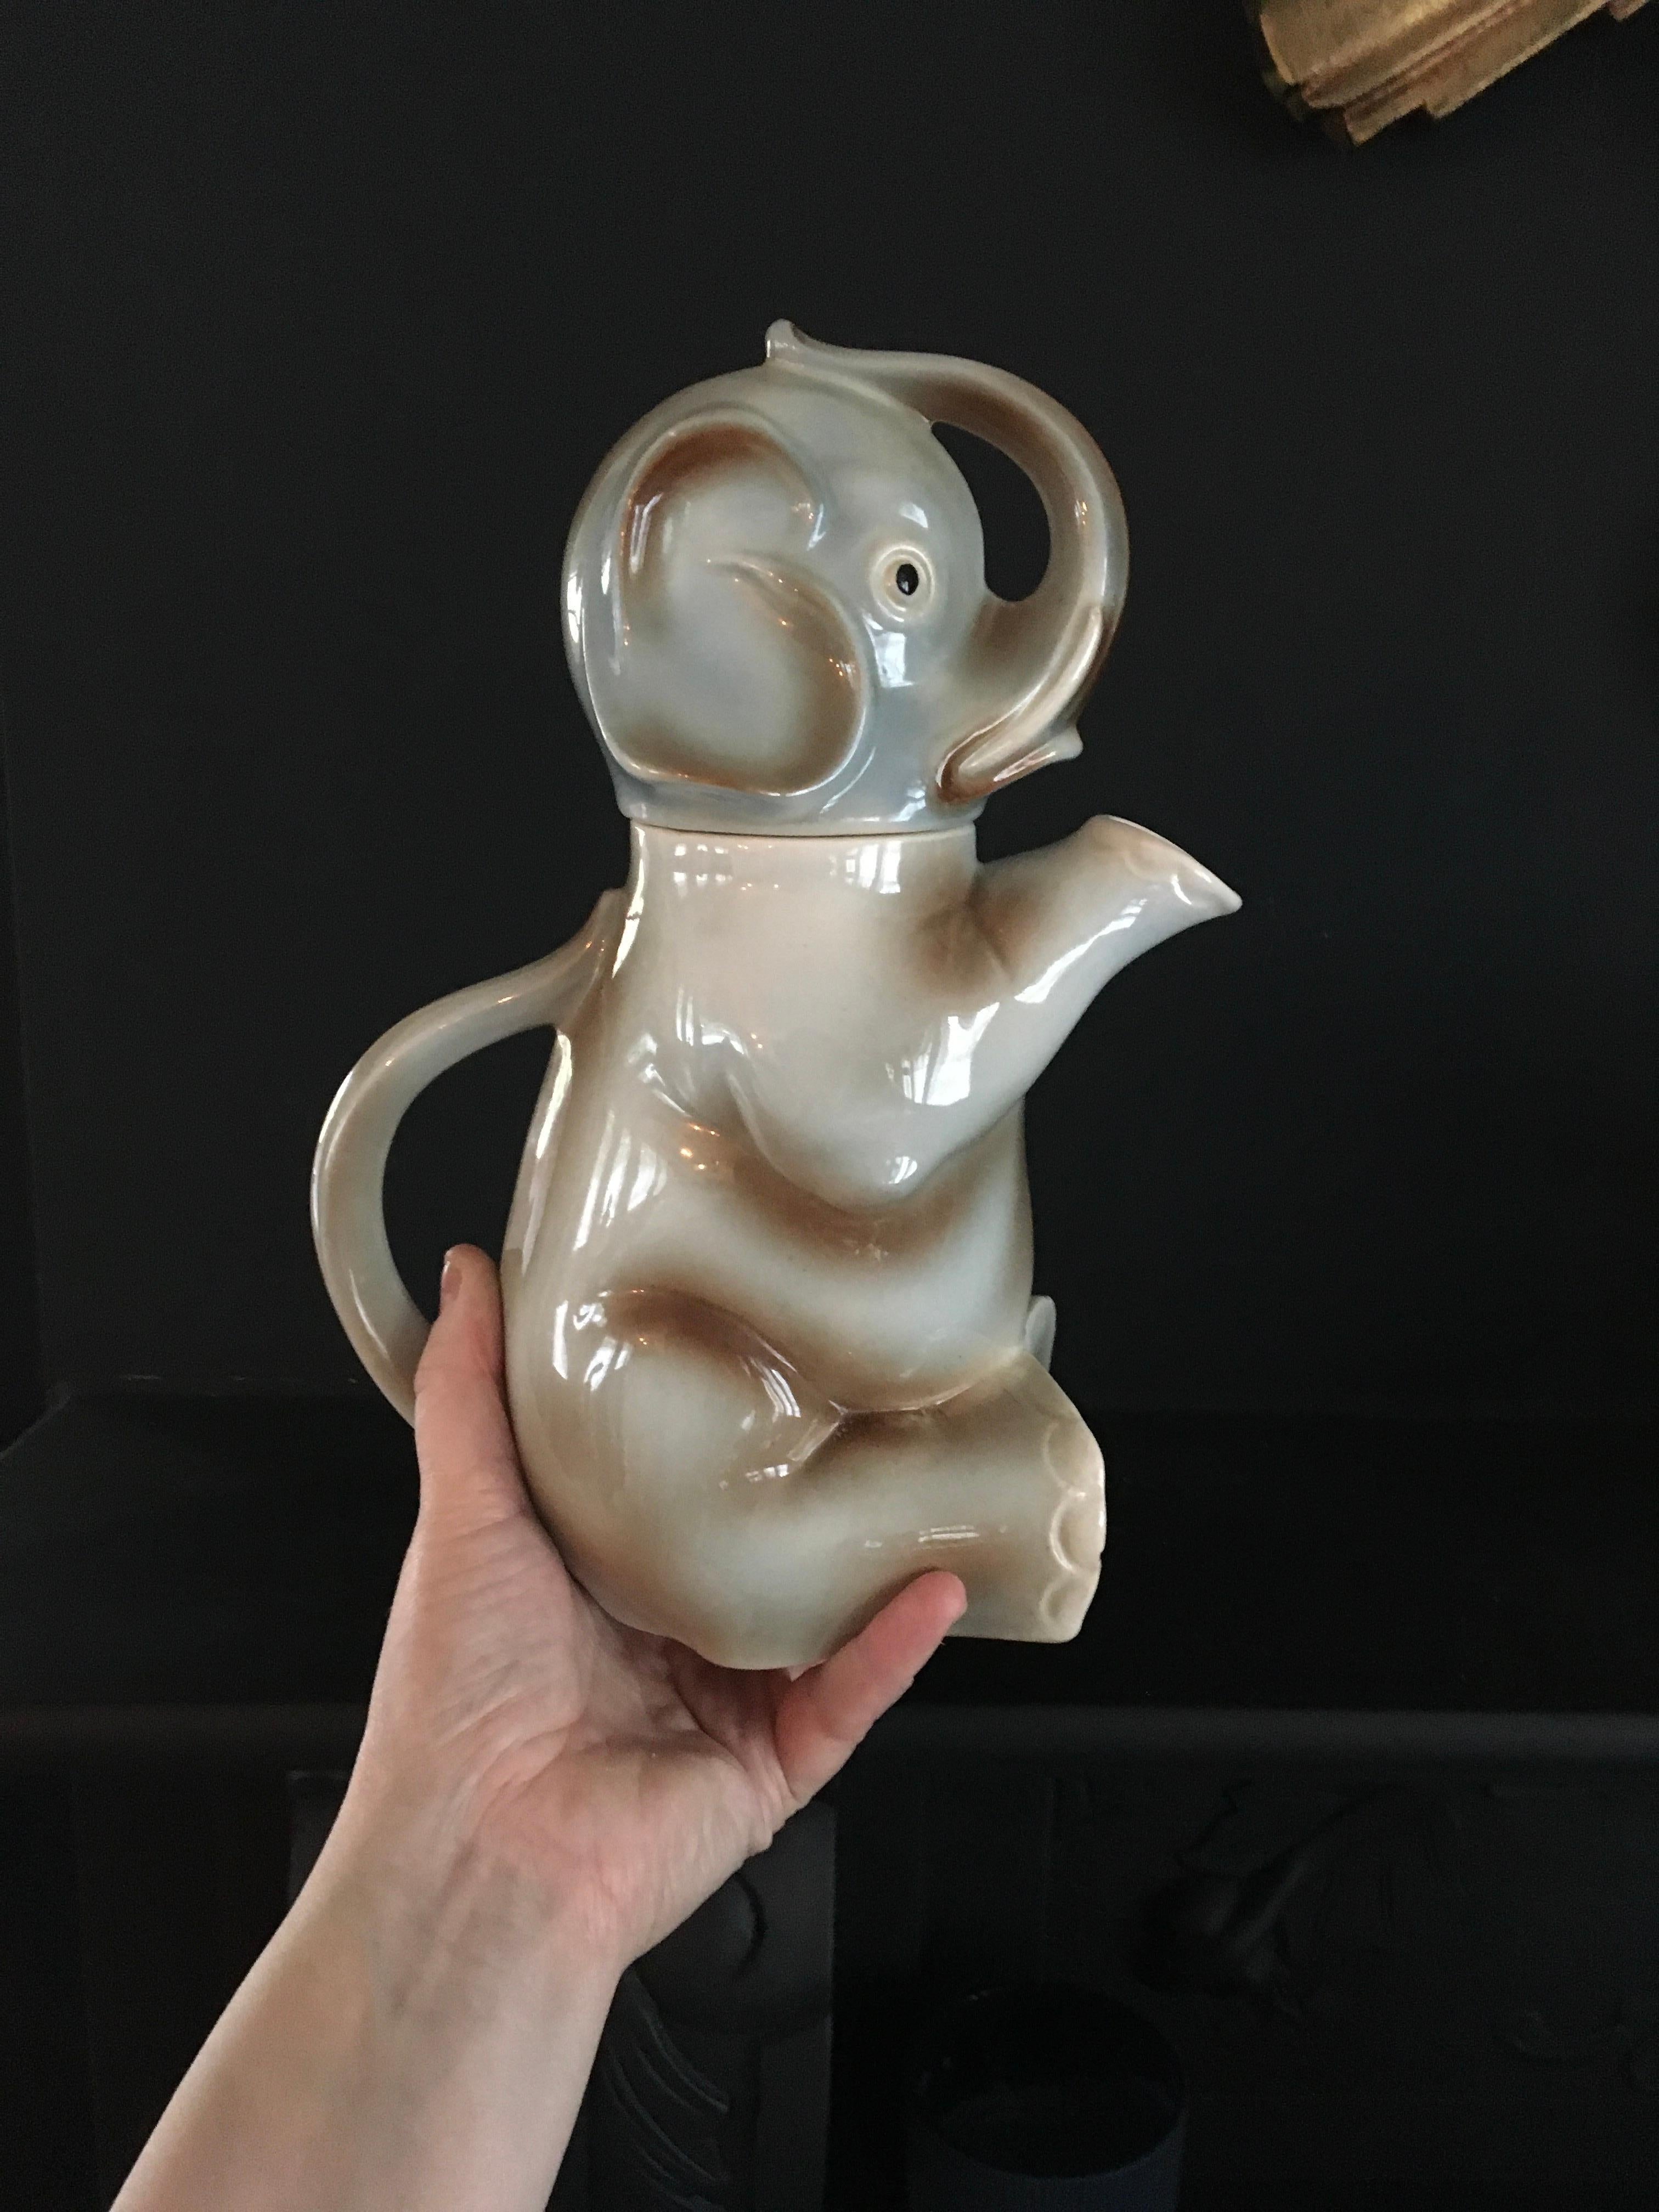 Elephant pitcher - elephant jug. 
A beautiful vintage pitcher in the shape of an elephant. 
It's a seated elephant sculpture with his feet in front and his trunk over his head. 
At the back you find the handle so you can pour the water, soda etc